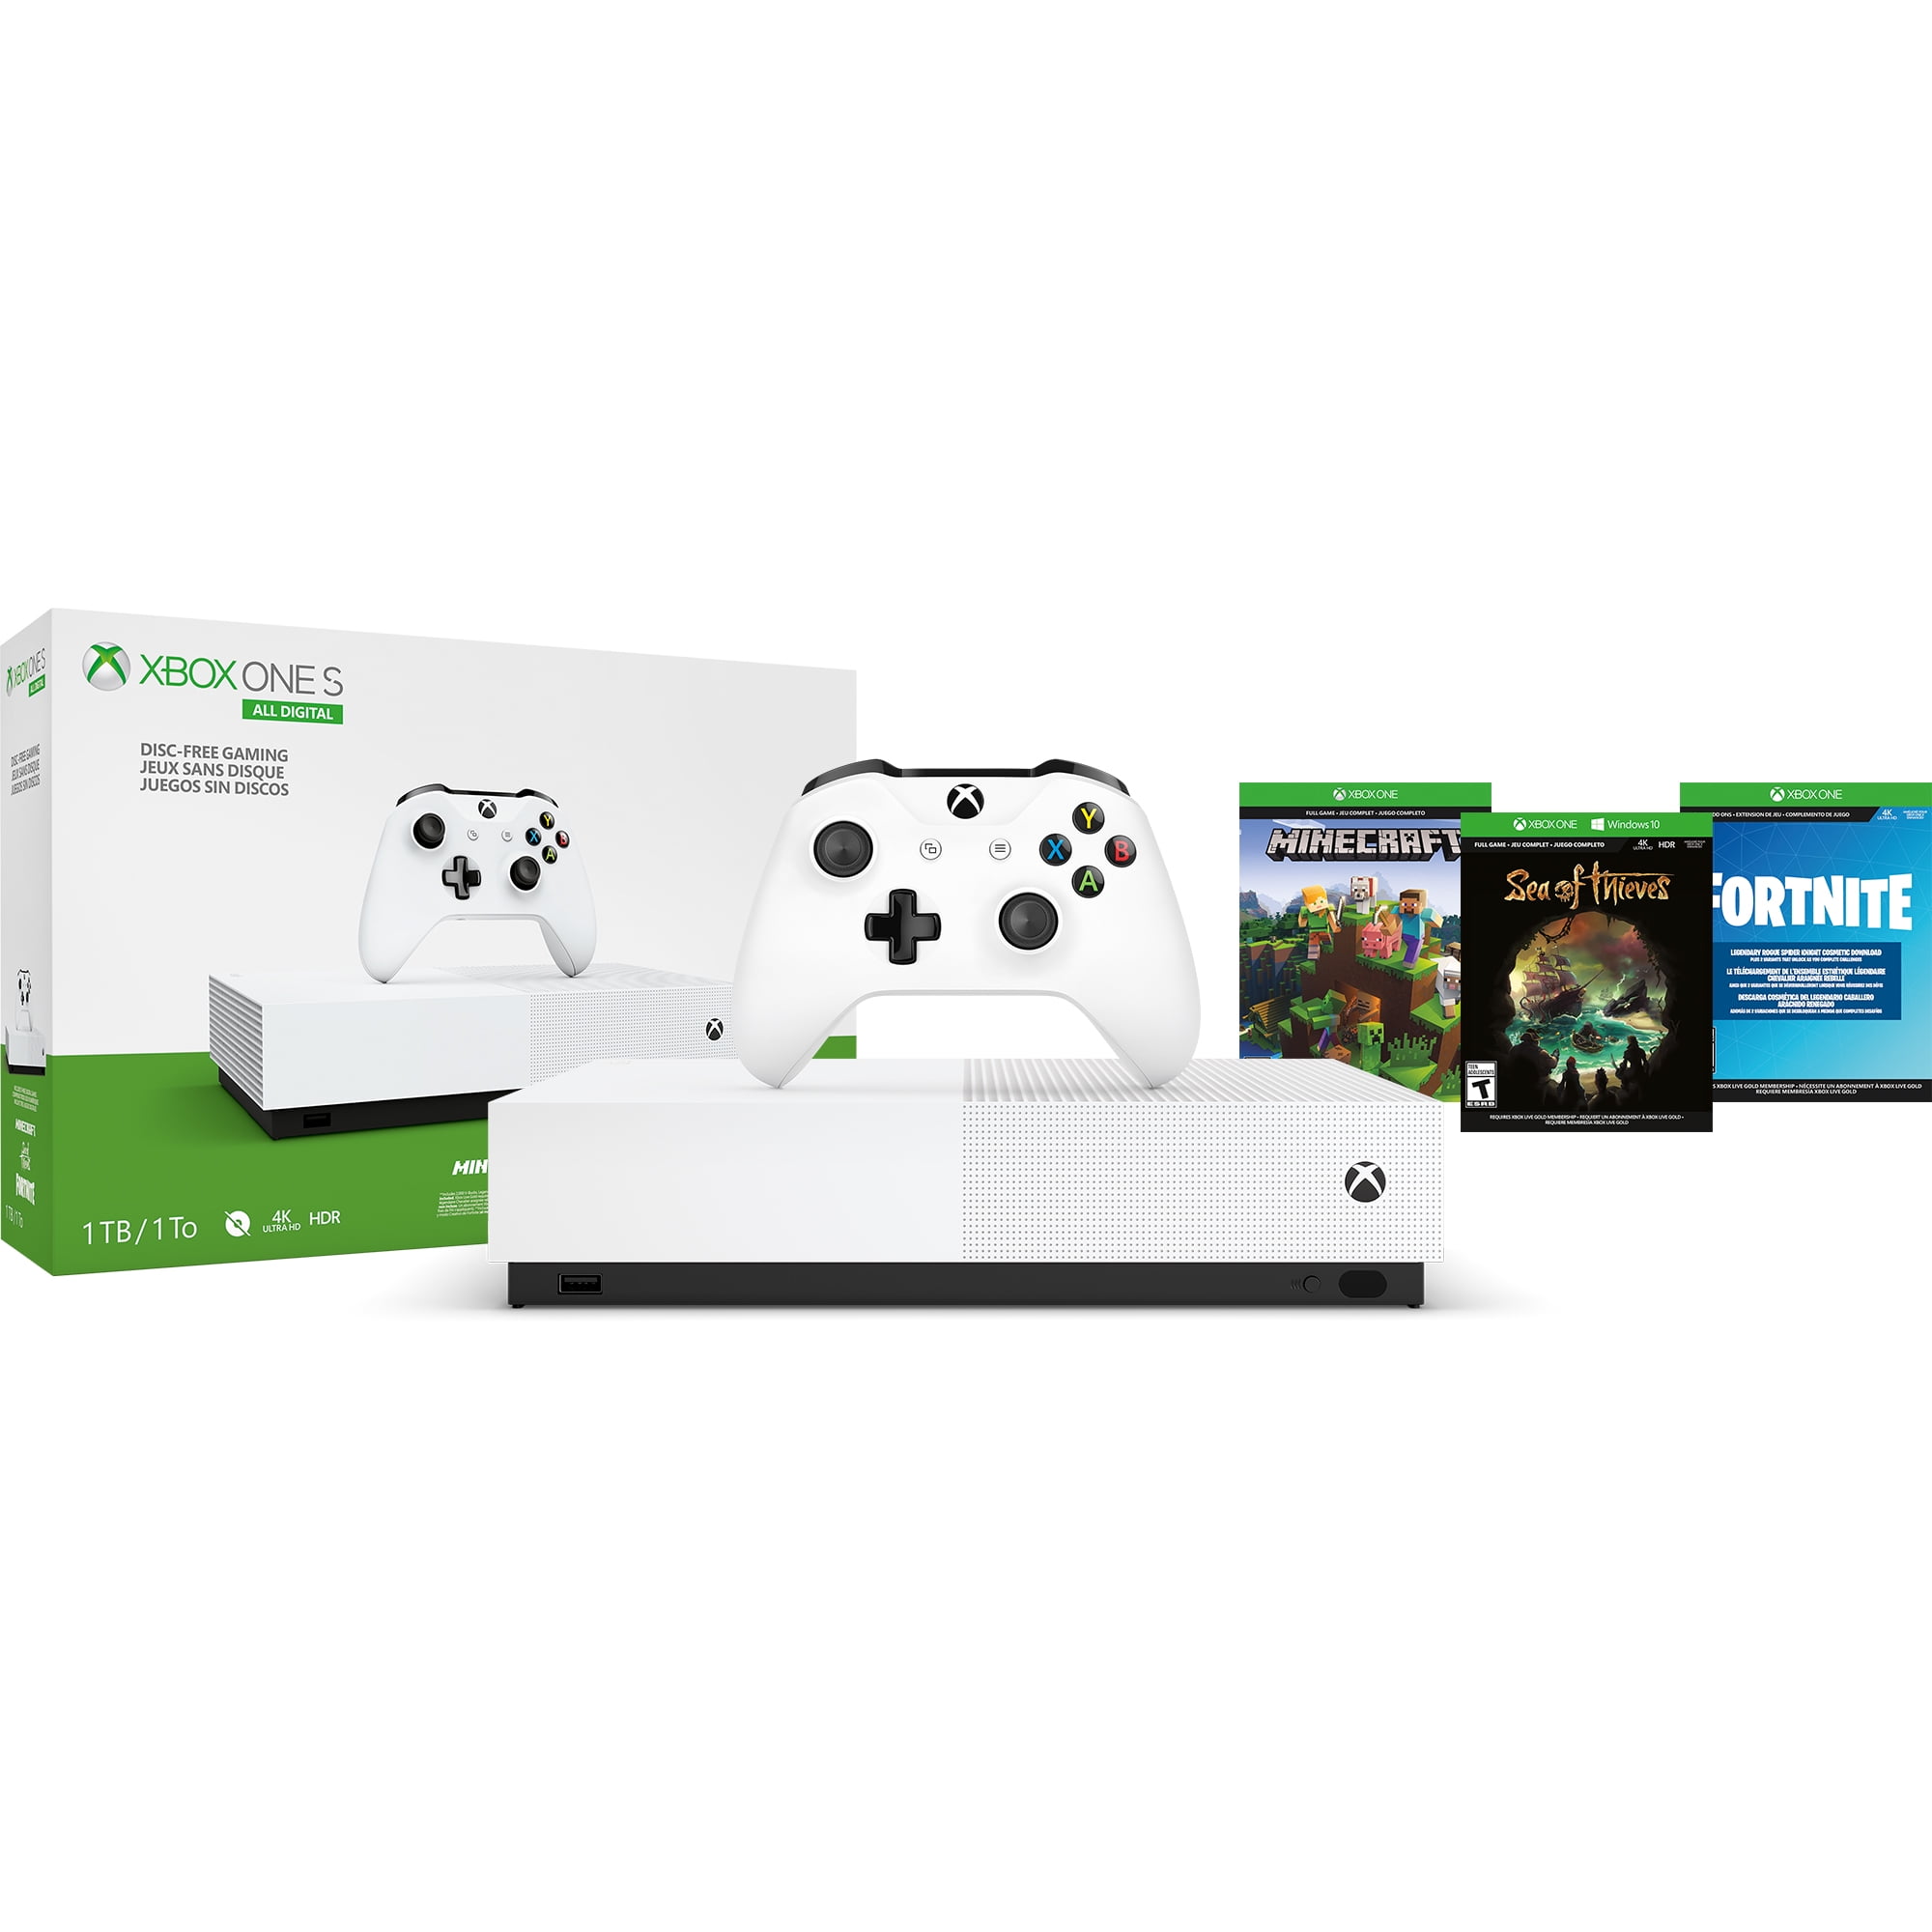  Xbox One S 1TB Console [Previous Generation] : Video Games